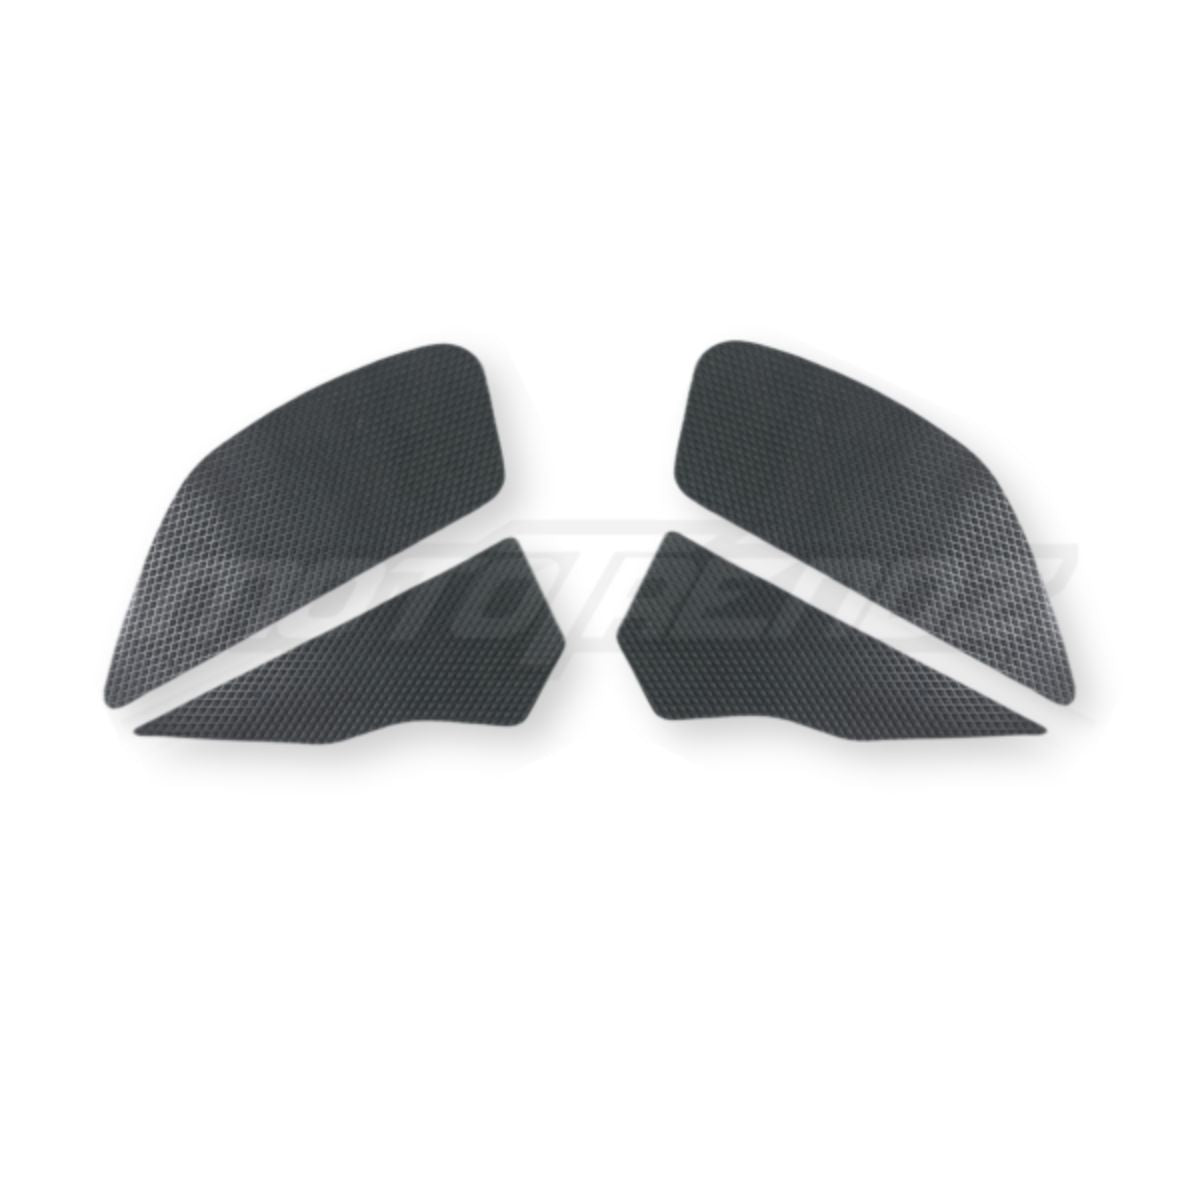 Traction Pads for Kawasaki ZX 10 R 2